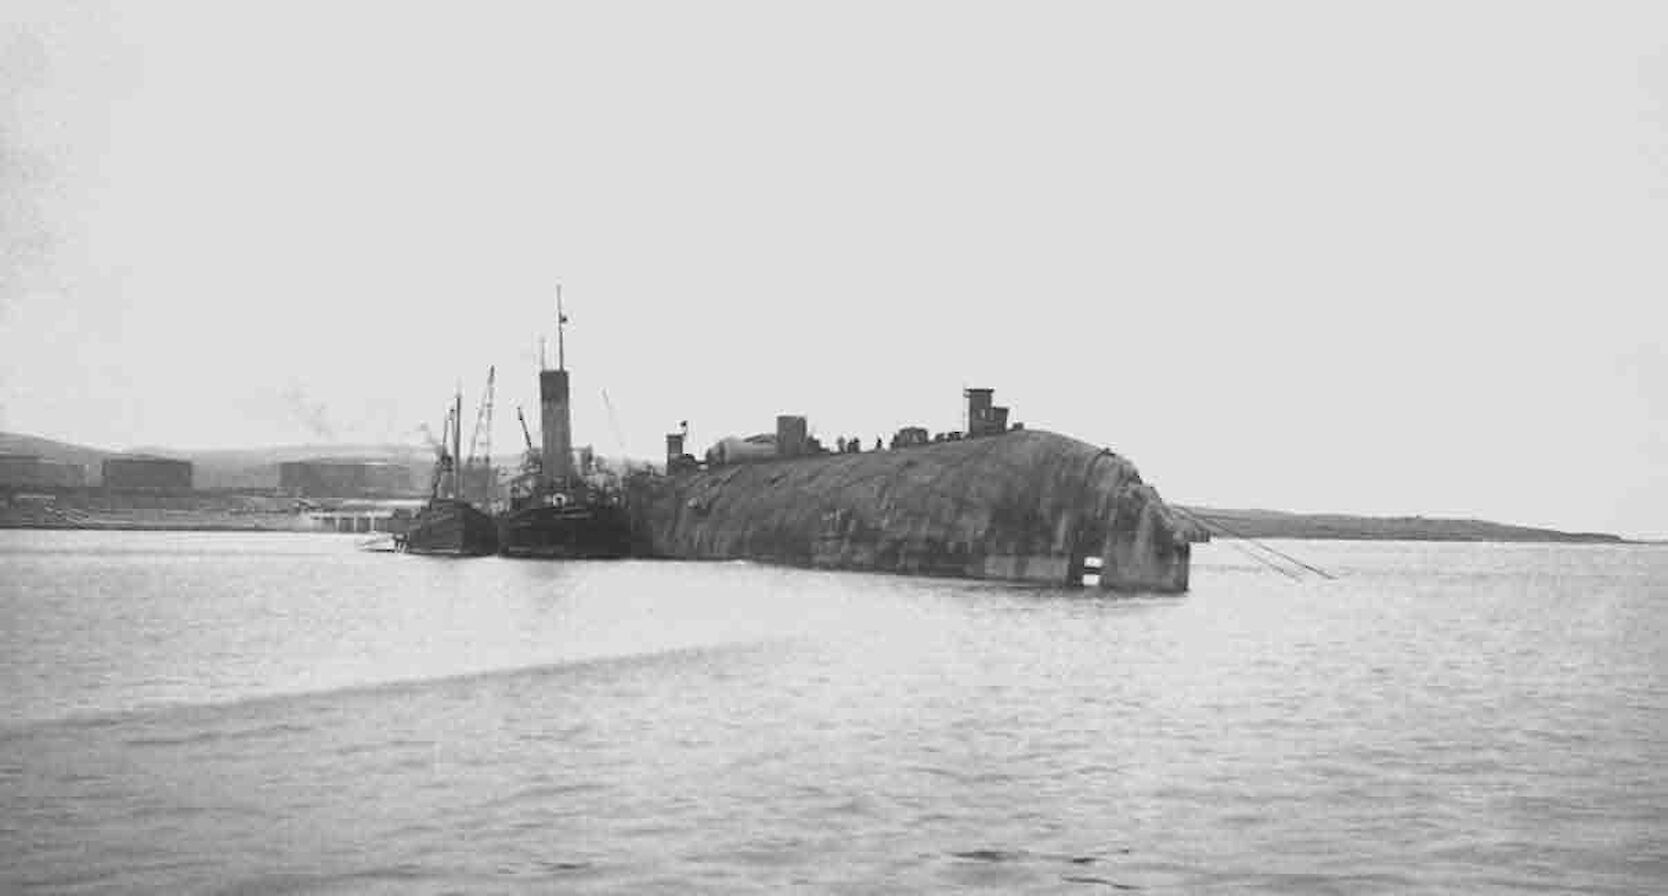 Salvage operations underway - image courtesy Orkney Library & Archive